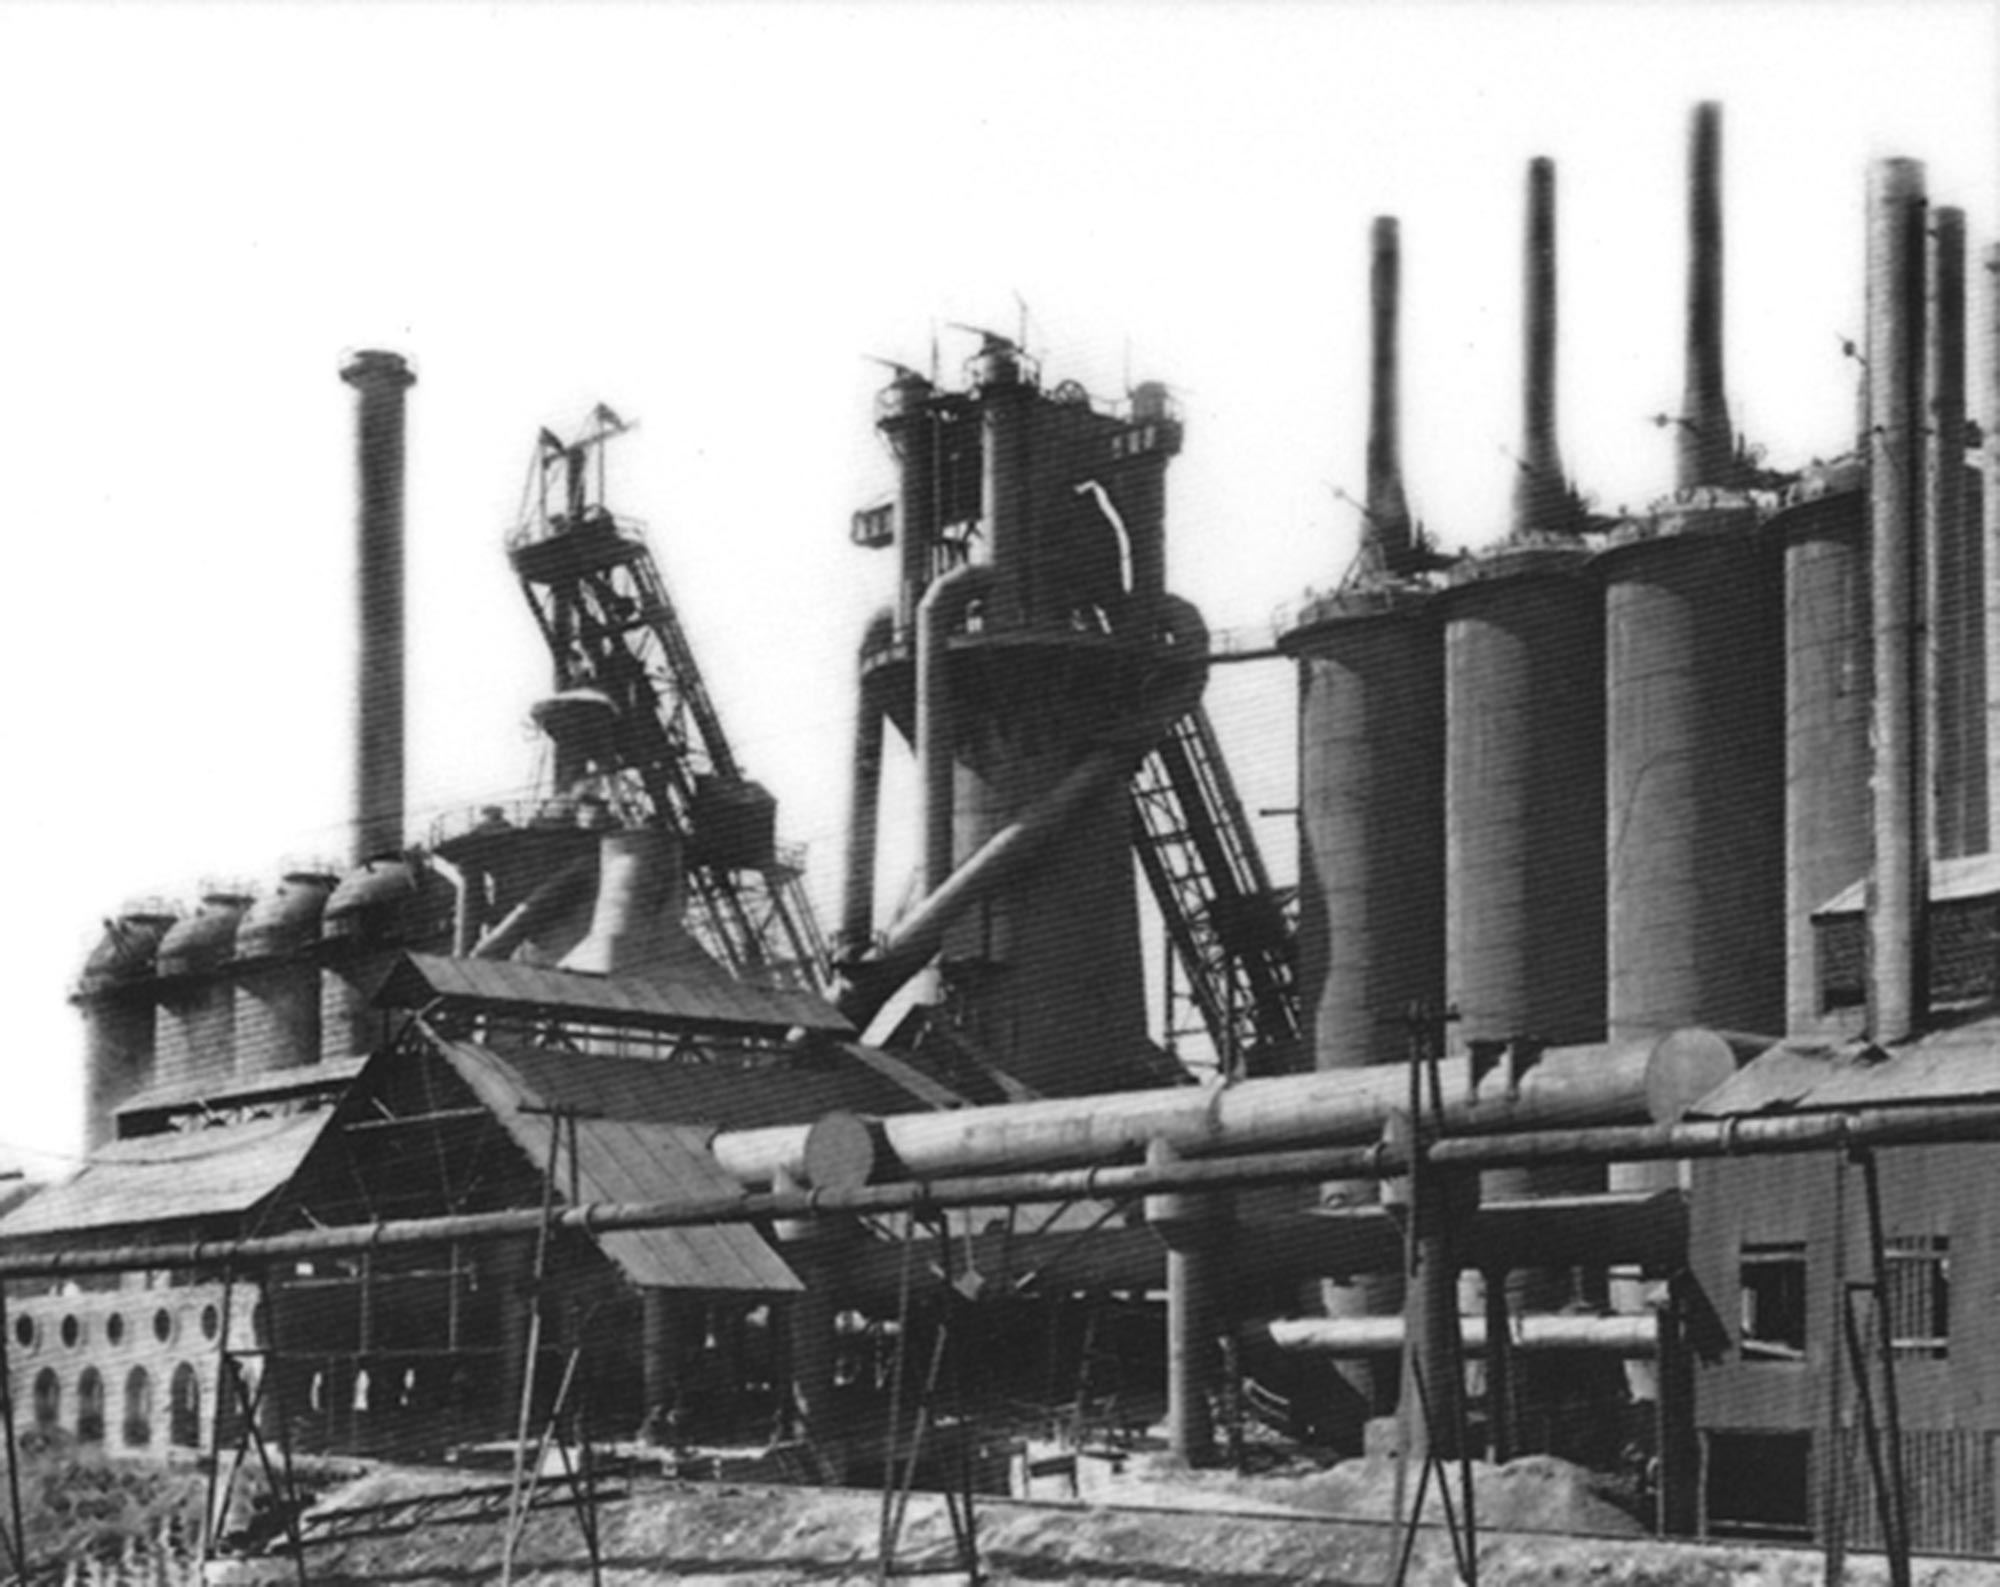 The blast furnaces that operated on the site.